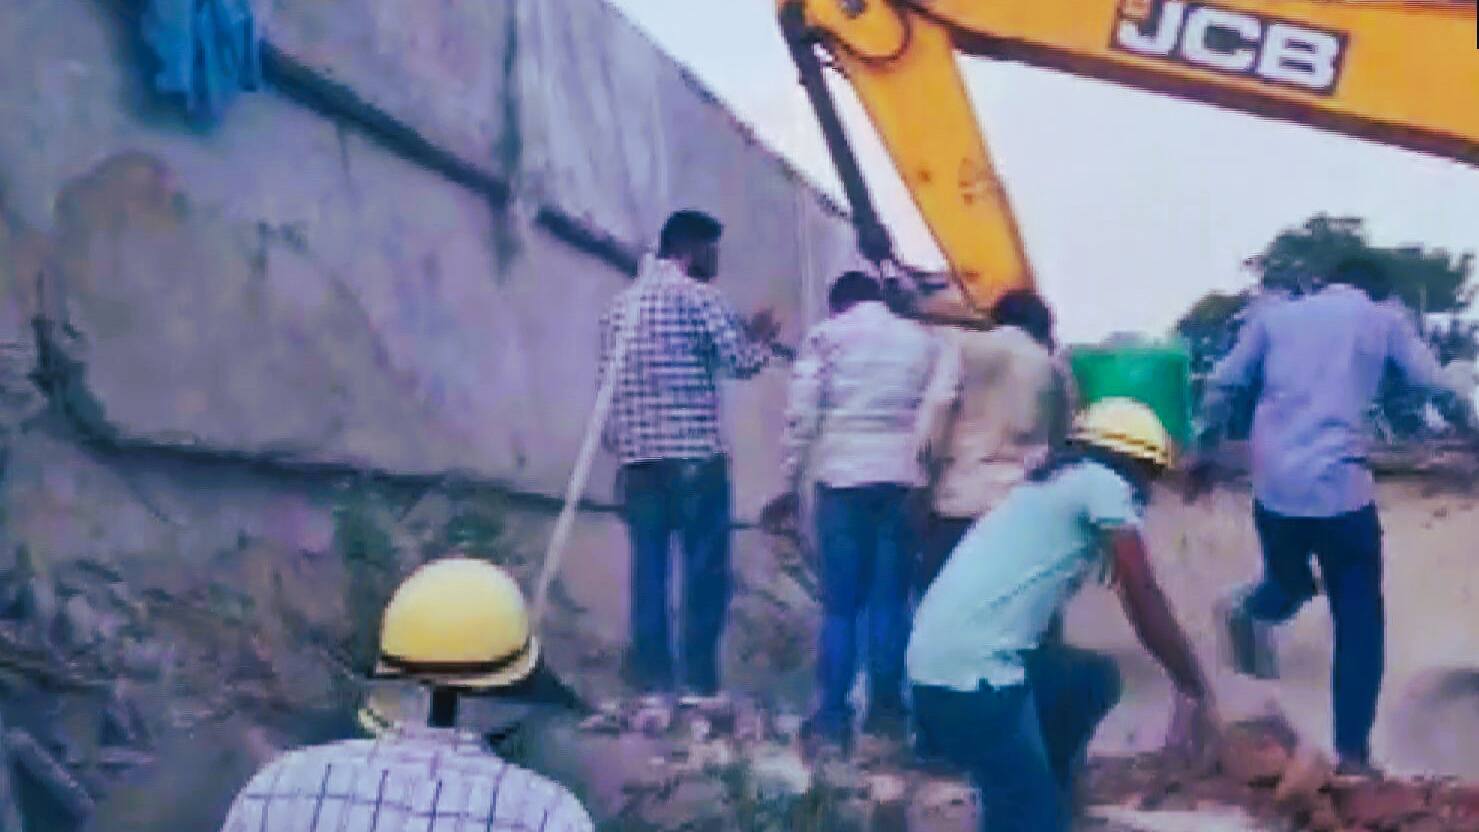  collapse of the rice mill building in Karnal